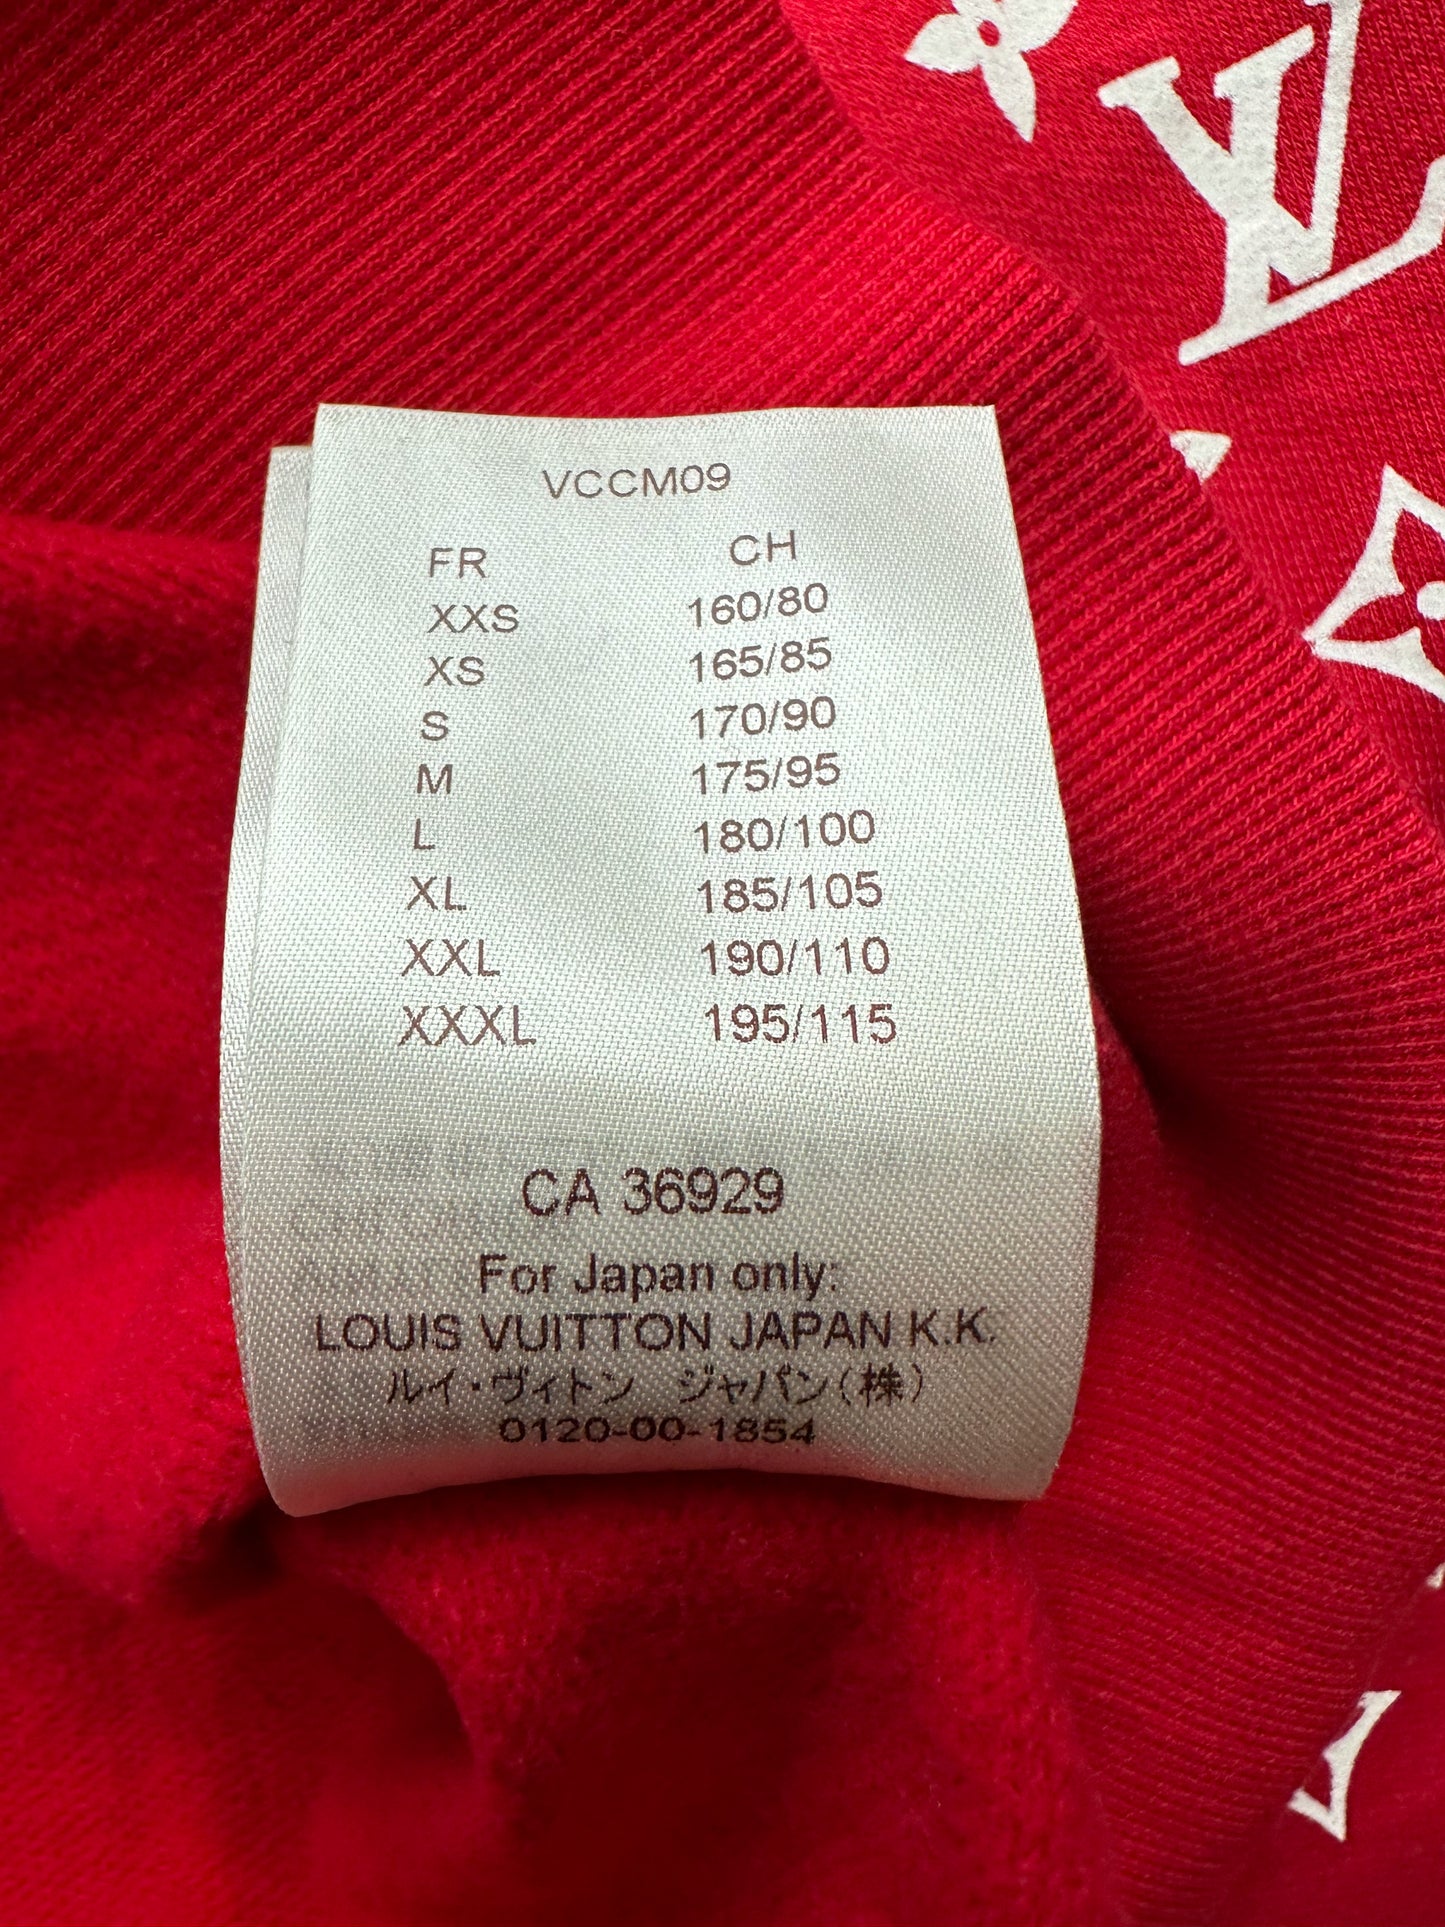 Buy Supreme LOUIS VUITTON 17AW LV Box Logo Hooded Sweatshirt Box Logo Pullover  Hoodie S Red from Japan - Buy authentic Plus exclusive items from Japan